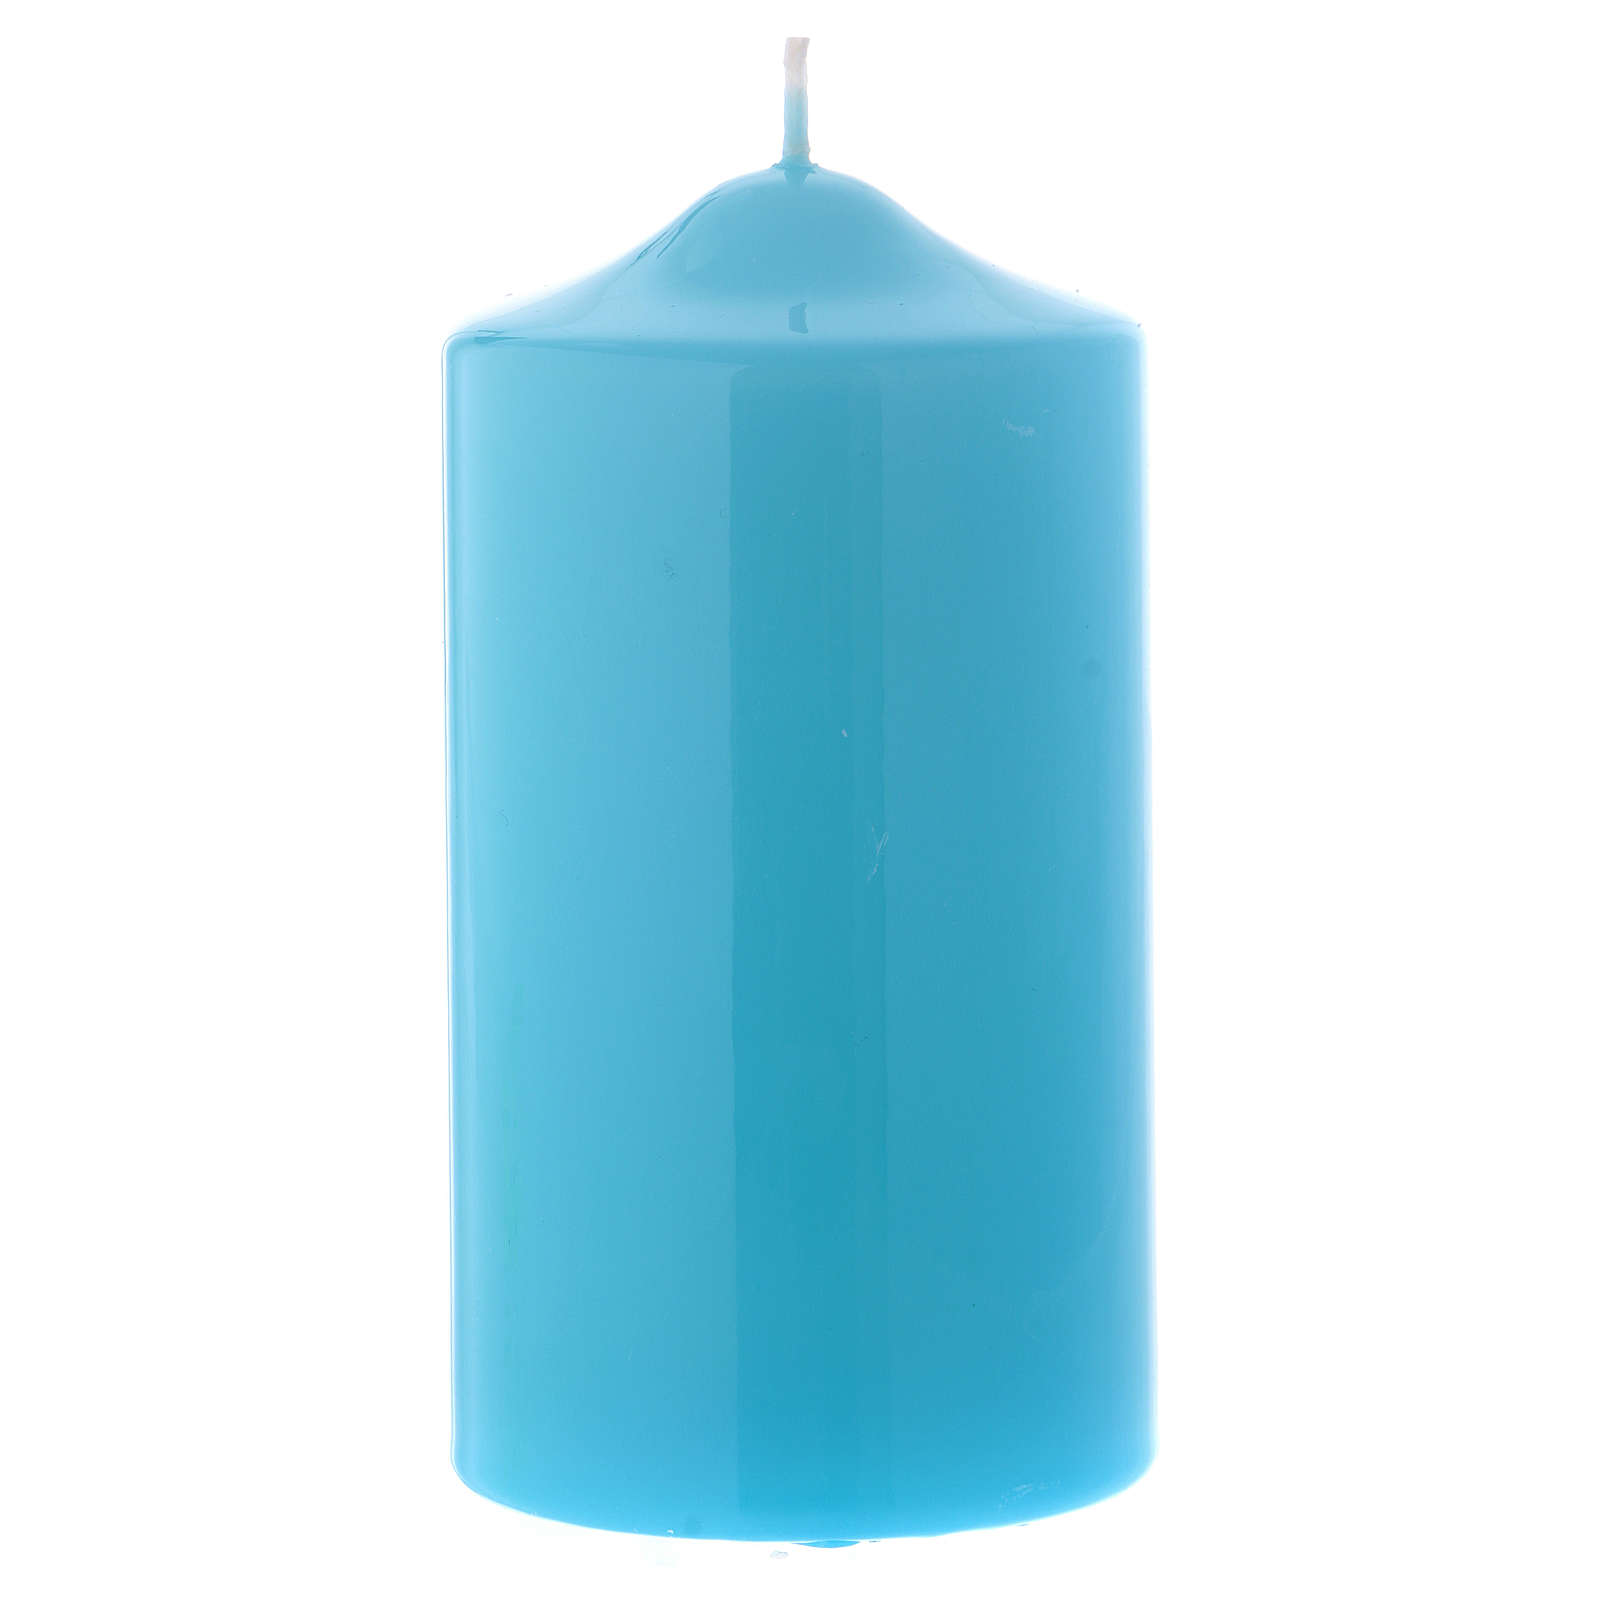 Light blue altar candle 15x8 cm, Ceralacca collection | online sales on ...